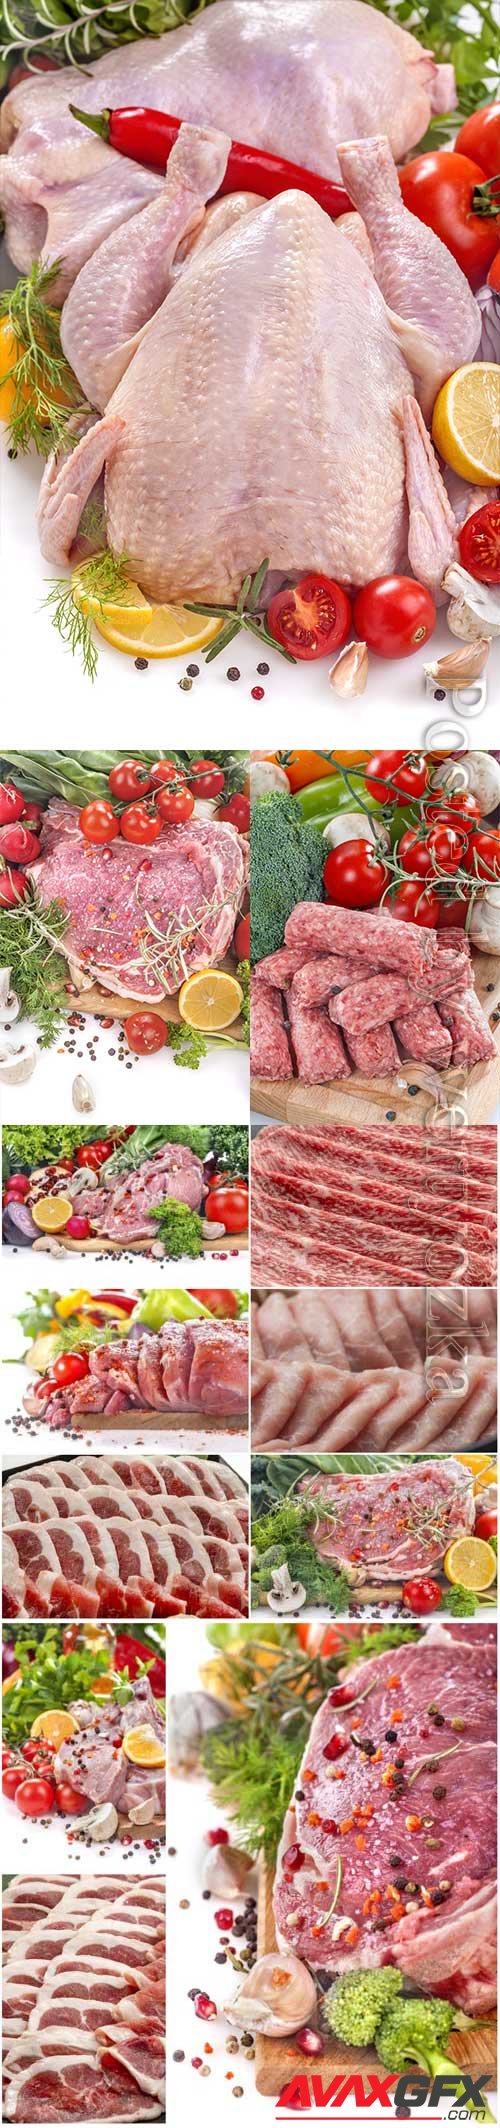 Fresh minced meat and meat stock photo